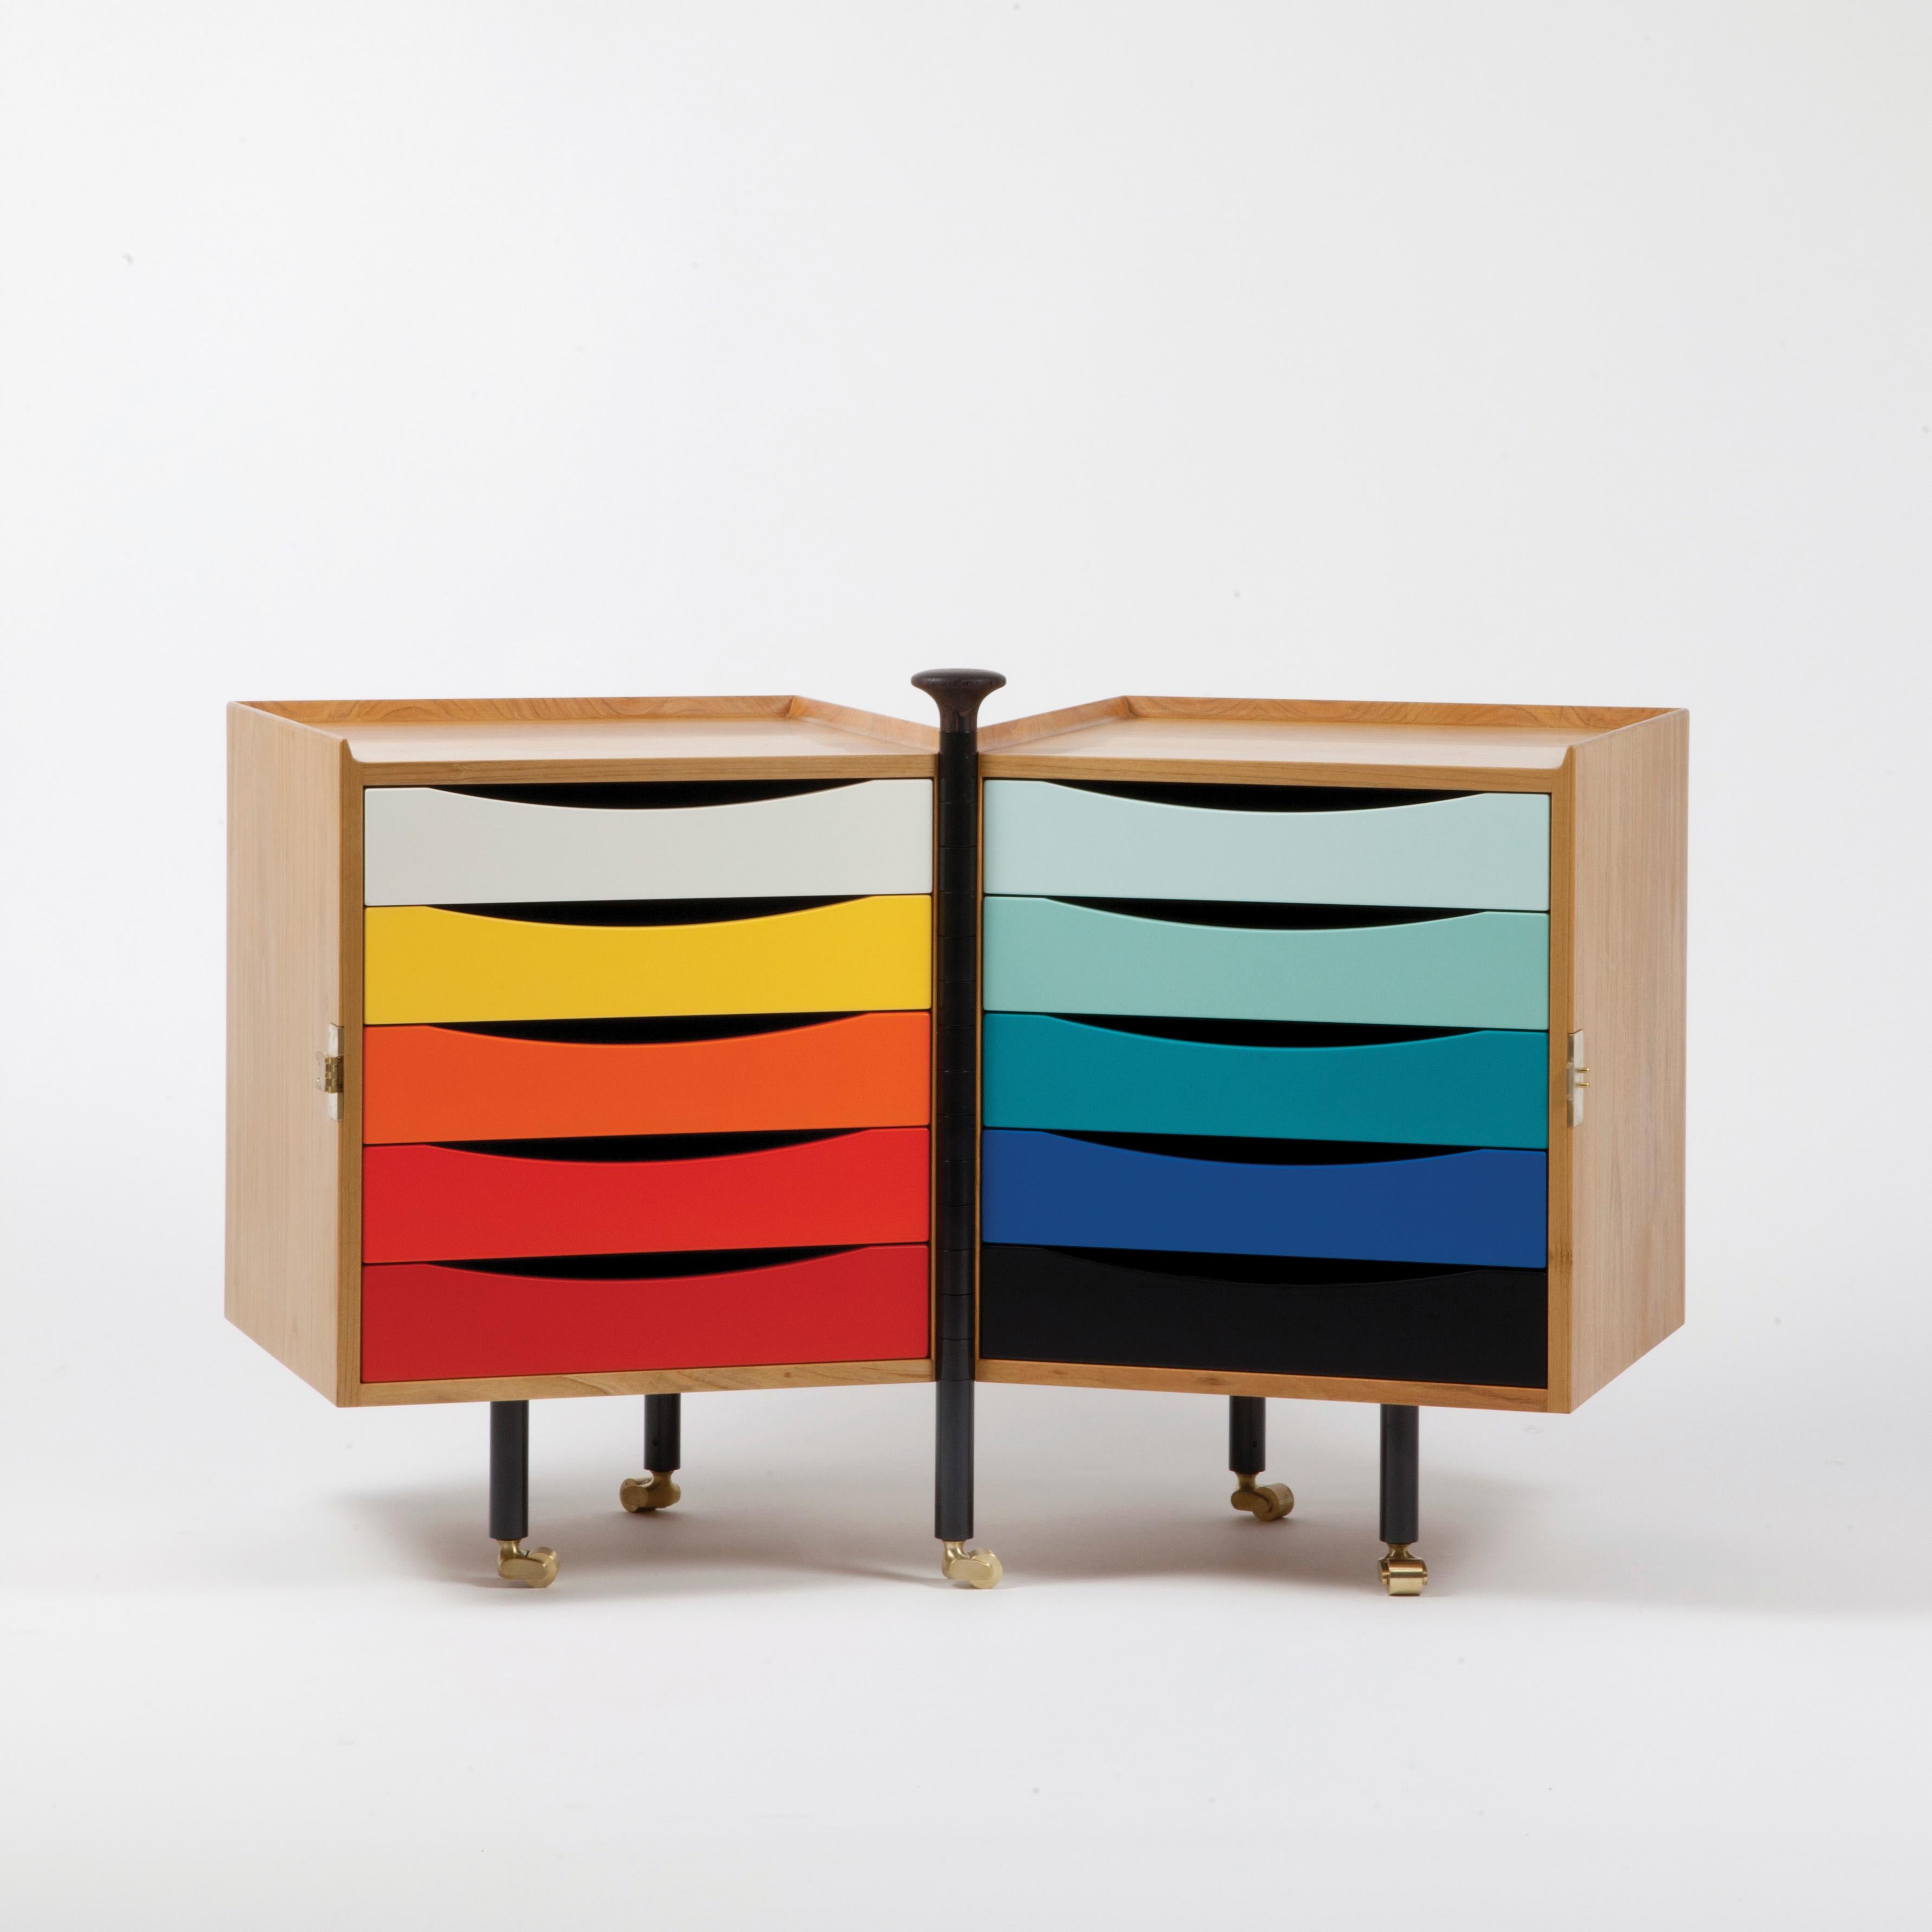 Cabinet designed by Finn Juhl in 1961, relaunched in 2015.
Manufactured by House of Finn Juhl in Denmark.

The Glove Cabinet, designed by Finn Juhl for his wife Hanne Wilhelm Hansen, was presented by Ludwig Pontoppidan at the Cabinetmaker’s Guild